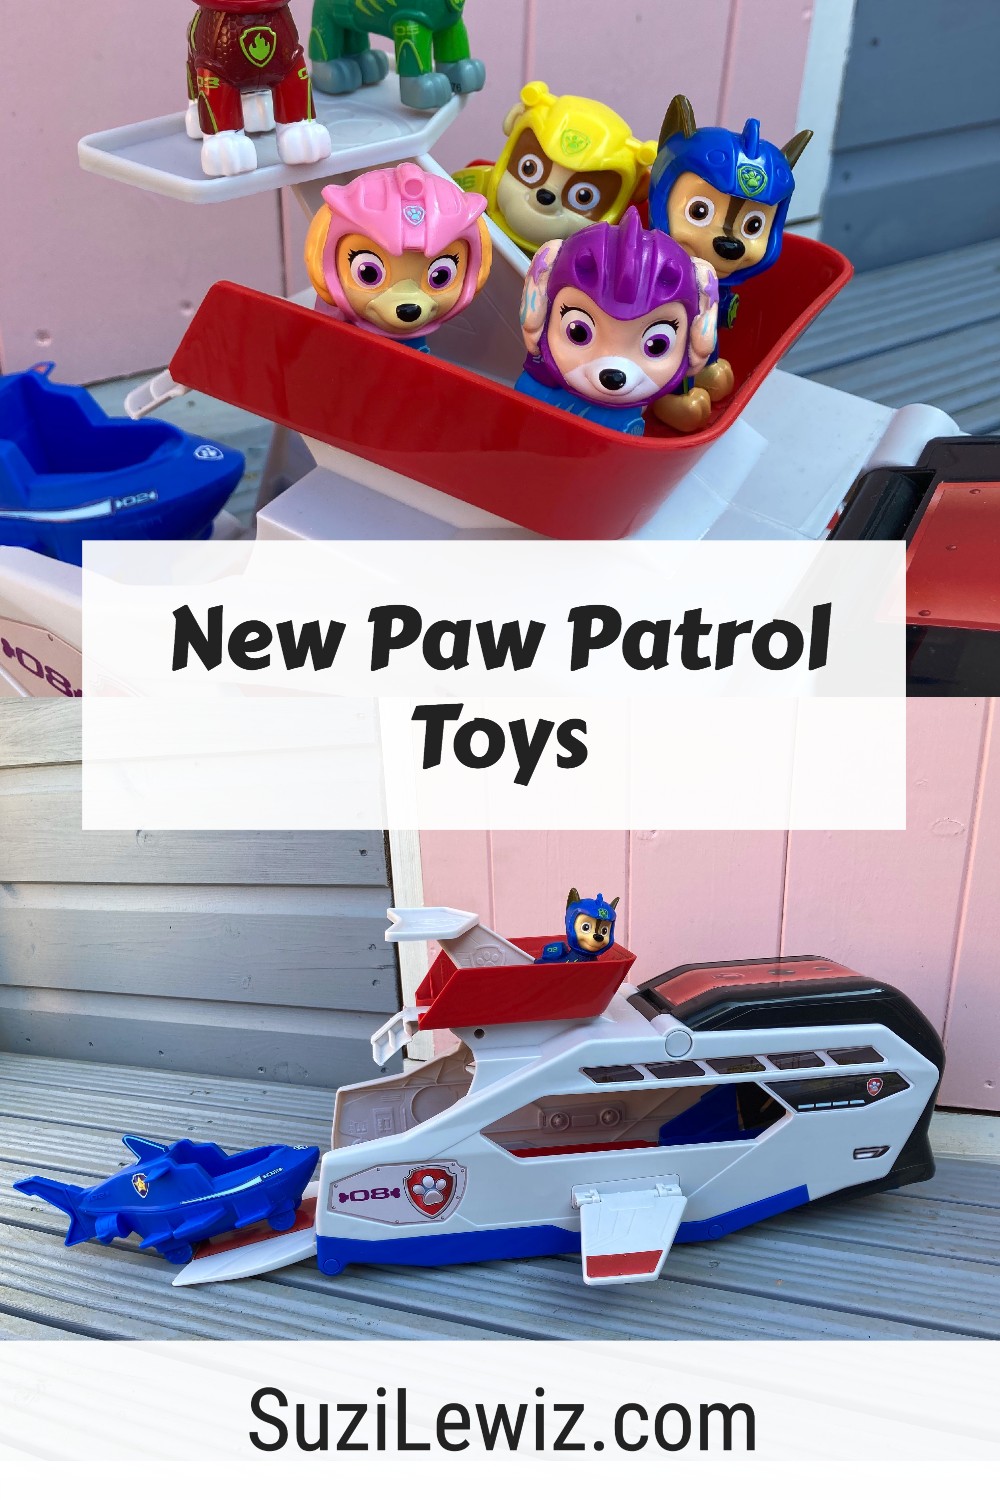 New Paw Patrol Toys - Aqua Pups and The Whale Patroller